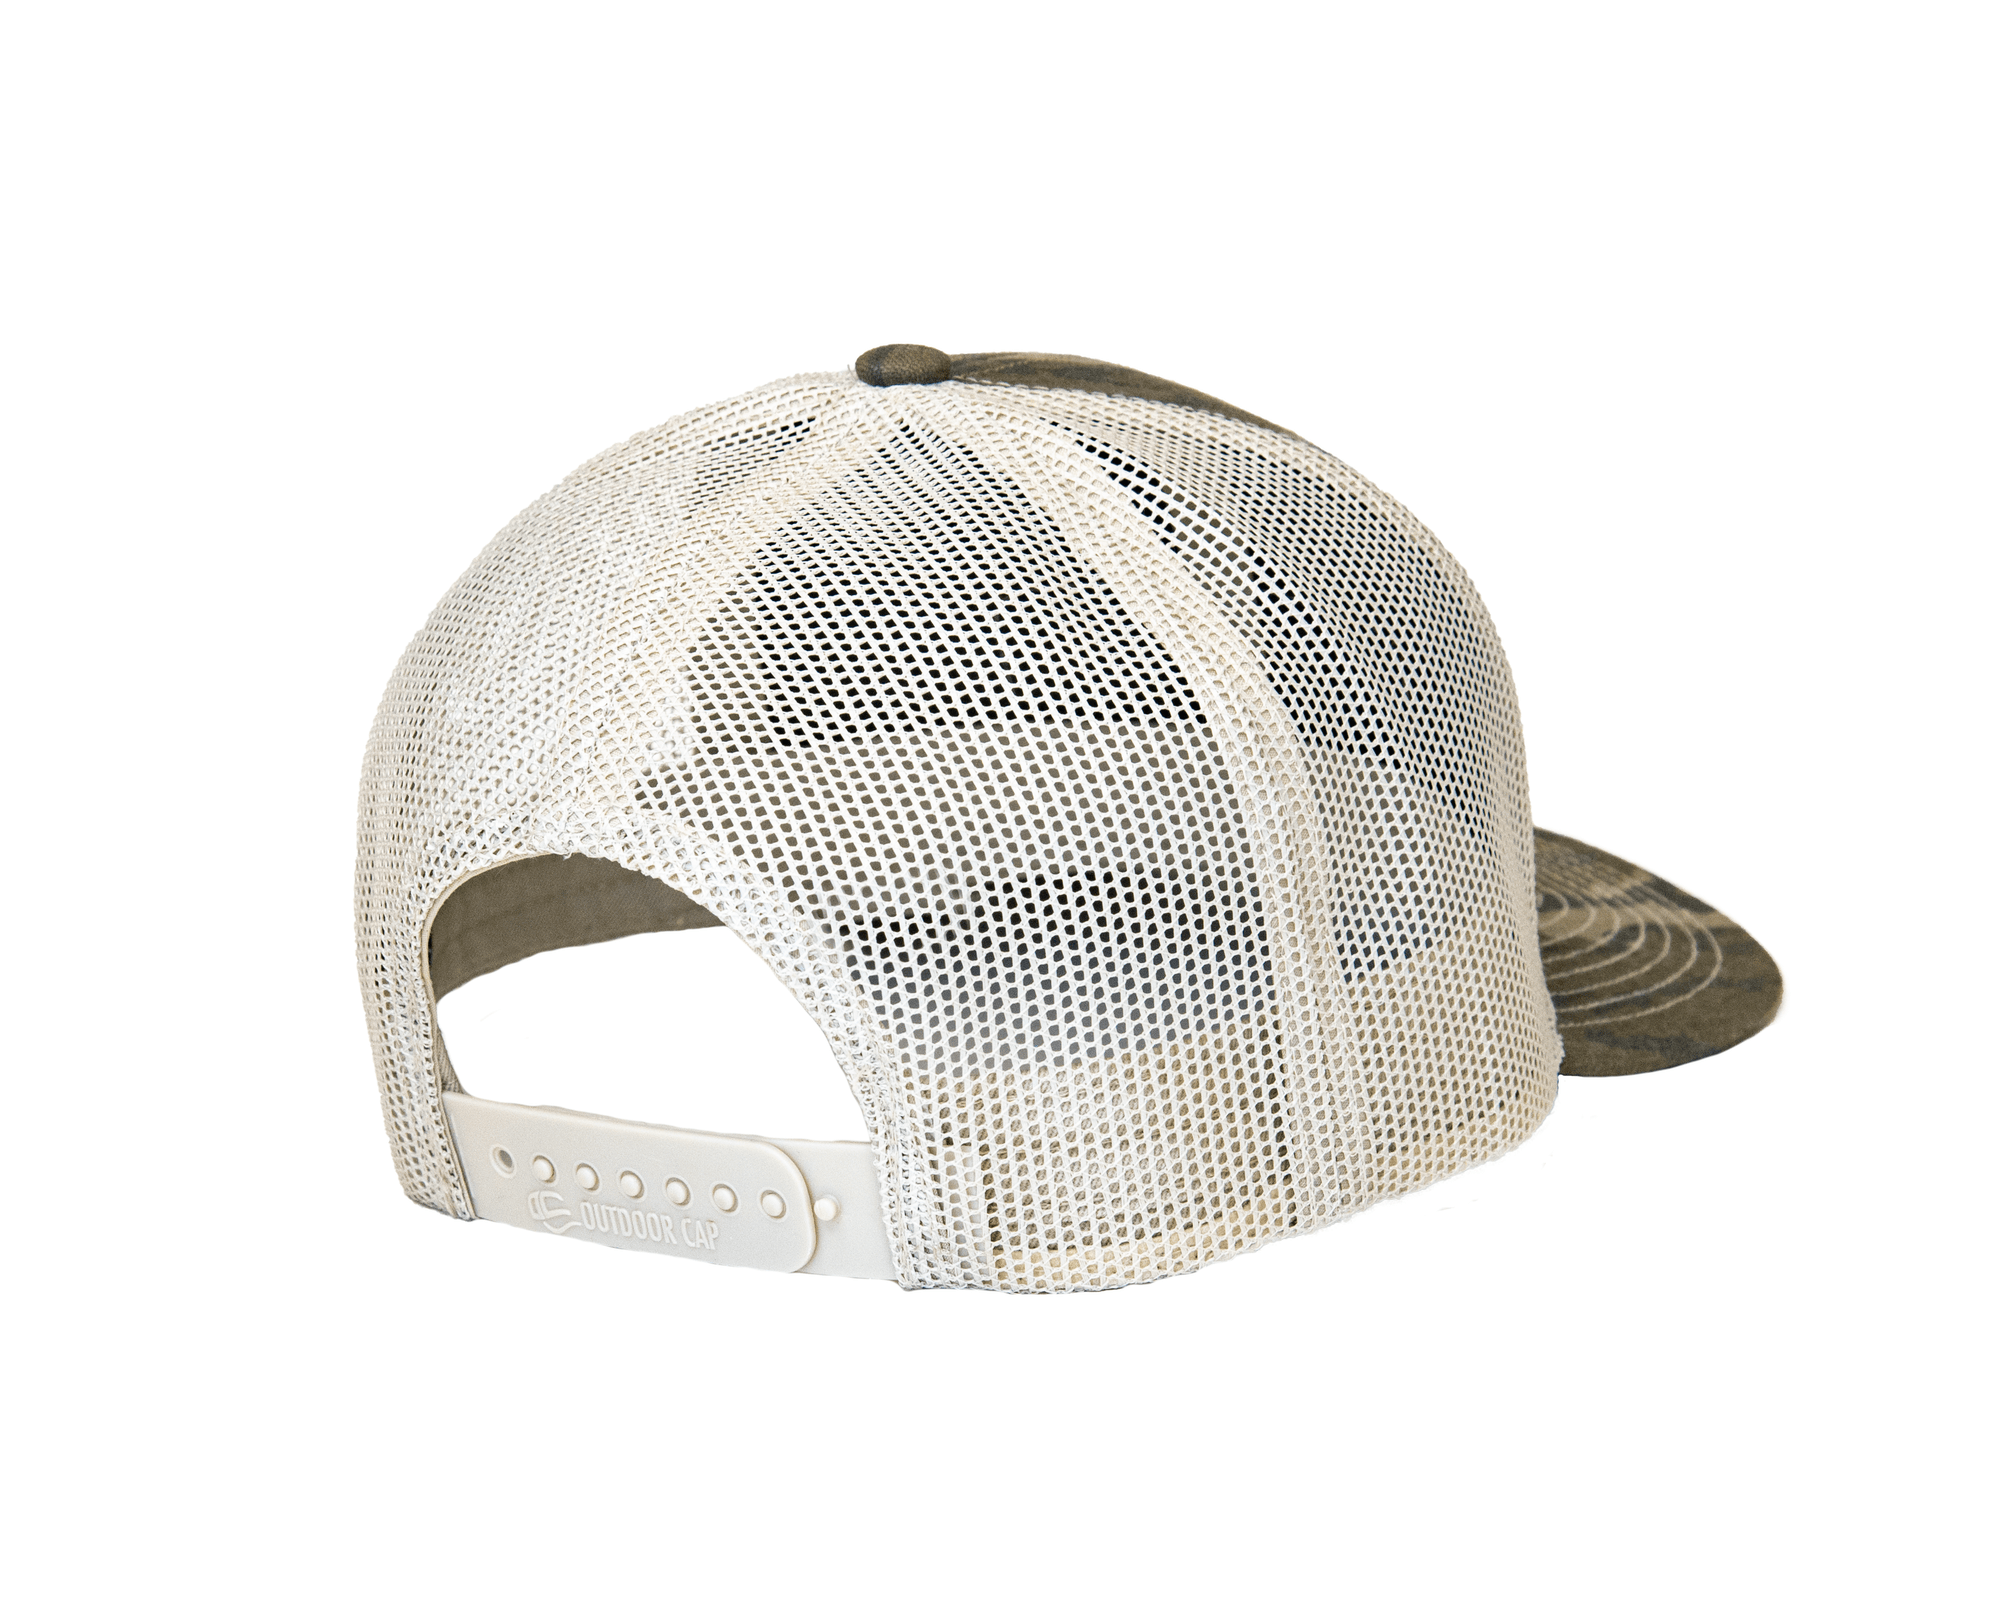 Leather Patch Trucker Hat - Latitude Outdoors